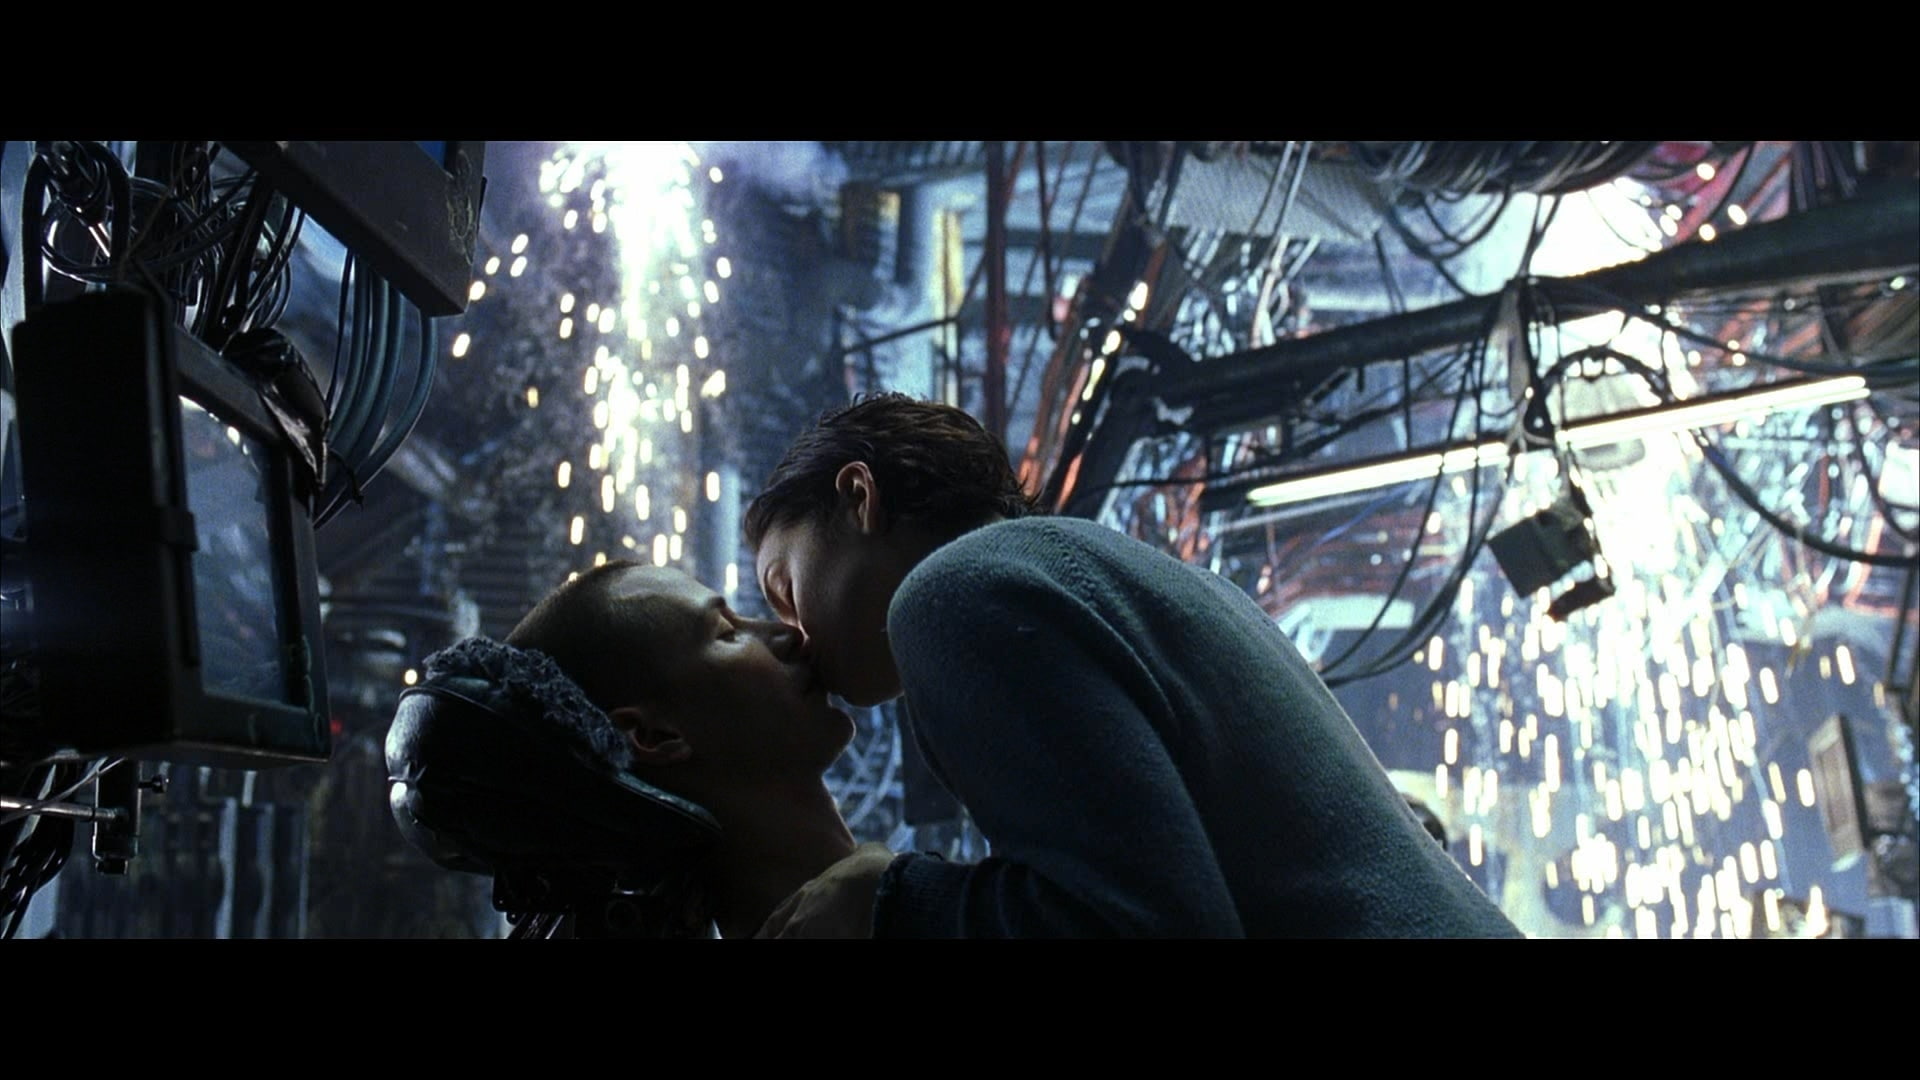 Free Download Hd Wallpaper Movies Neo Matrix Trinity Kissing Keanu Reeves Carrieanne Moss 6706